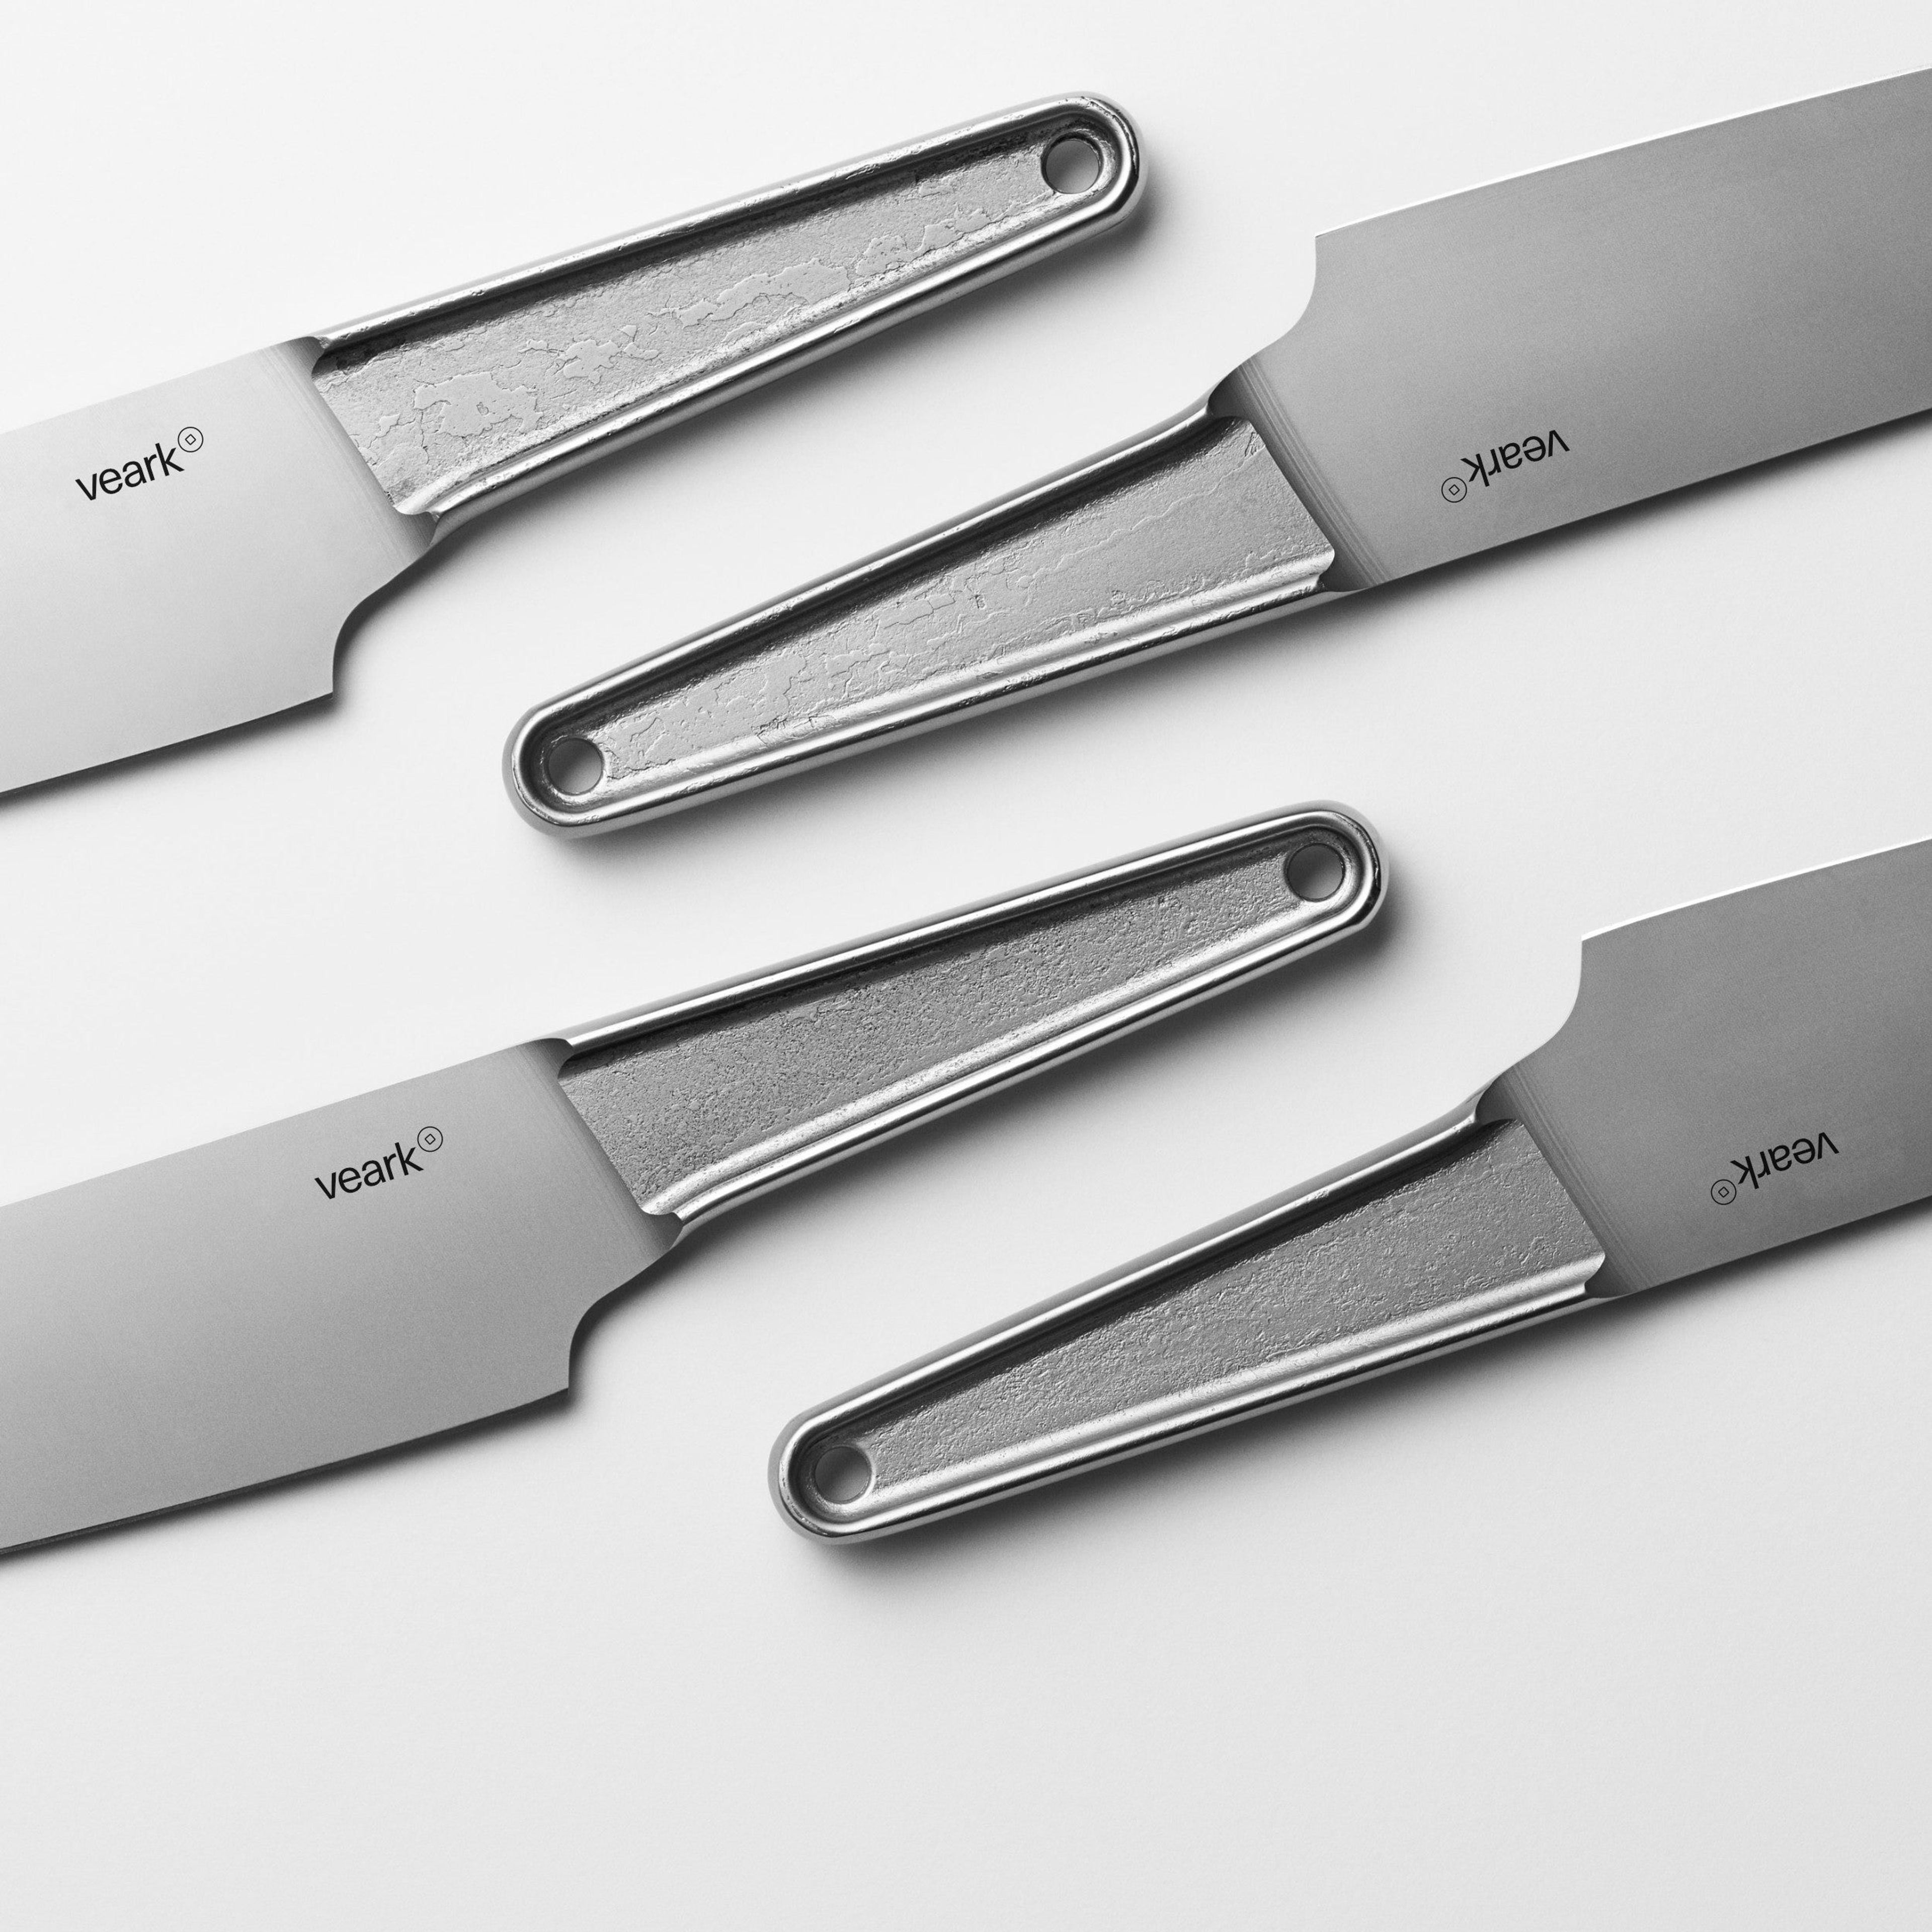 Veark CK16 Forged Chef's Knife